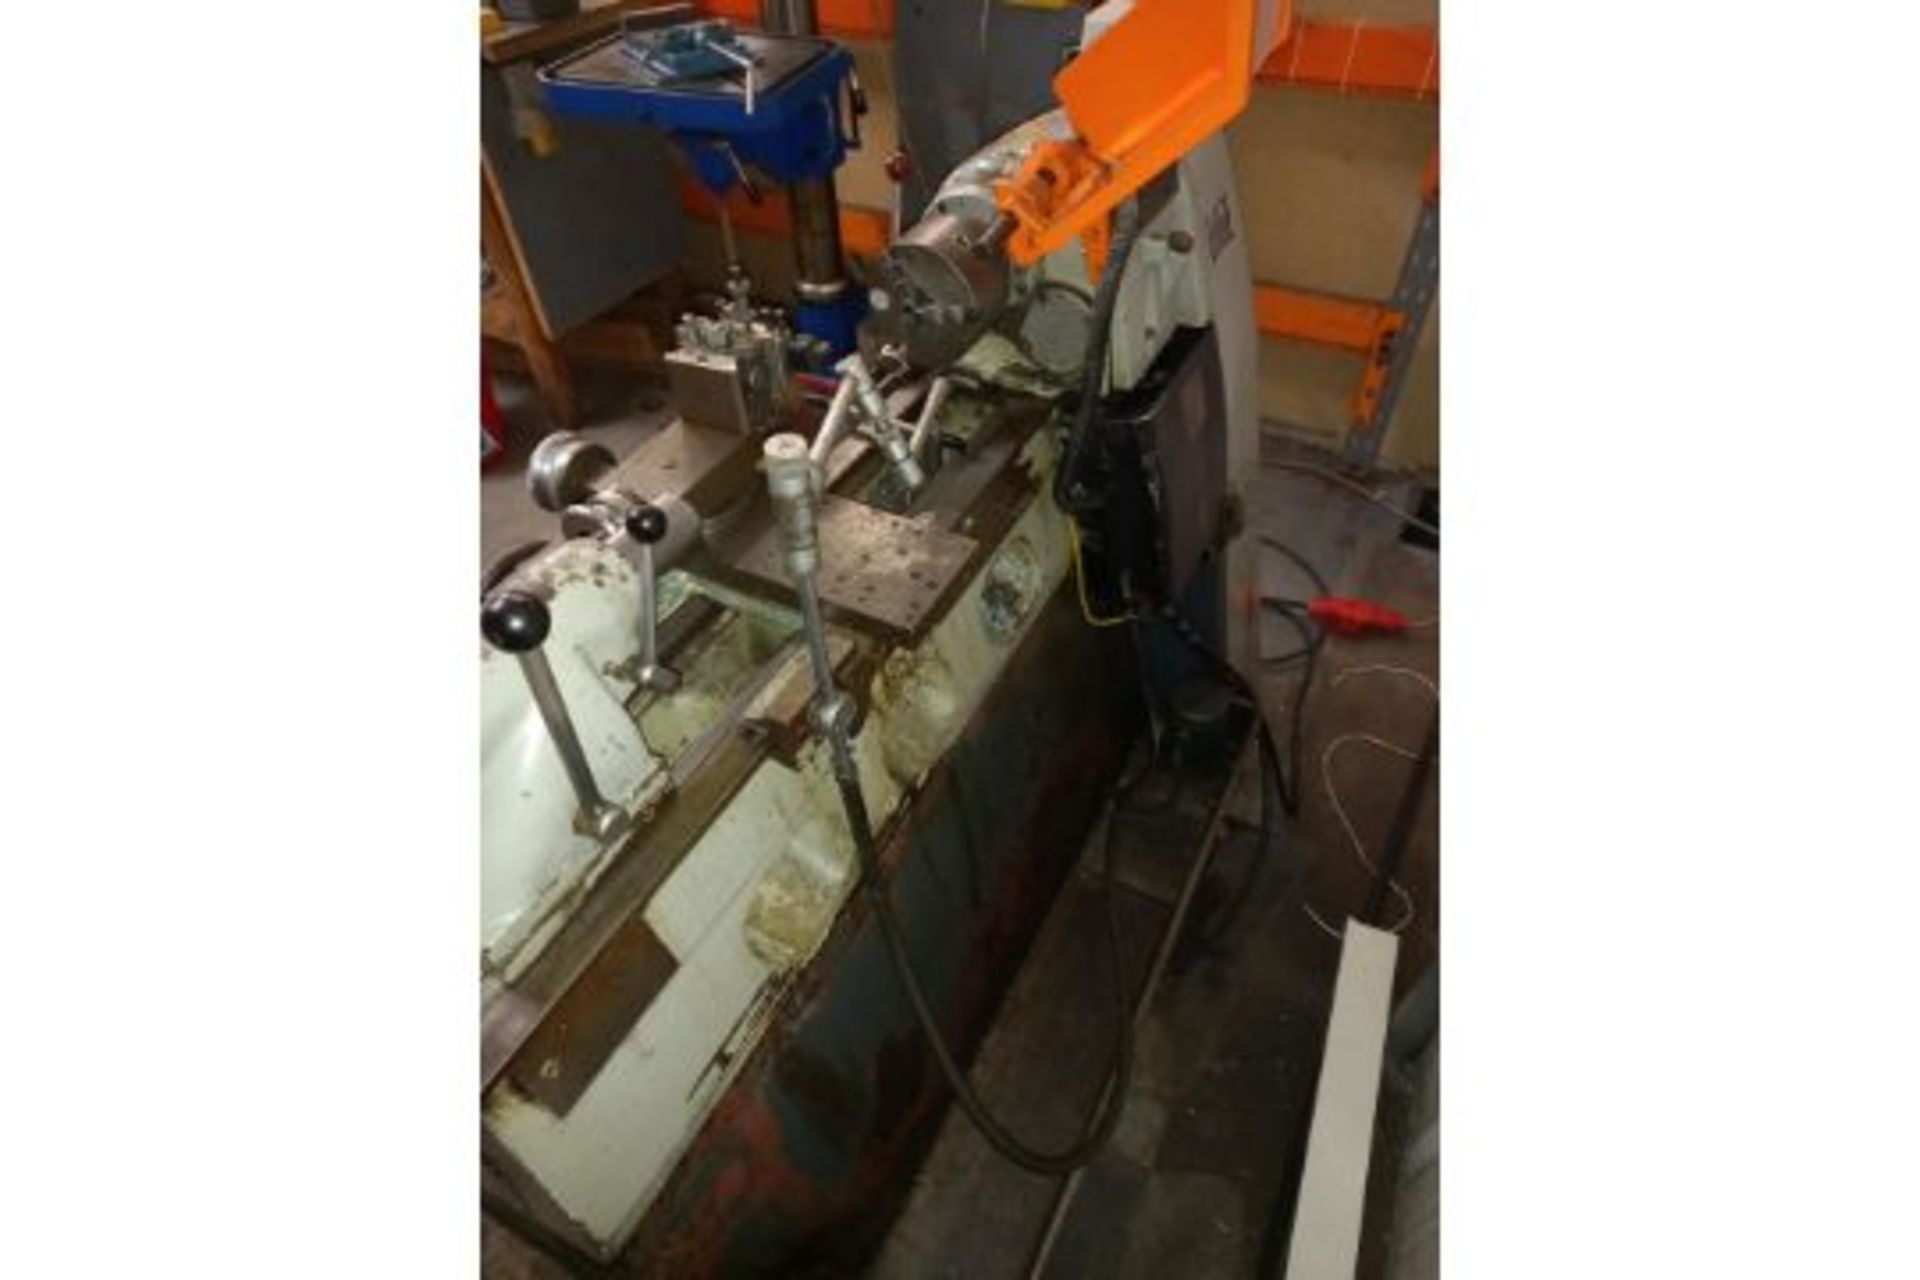 Colchester 5x20 Chipmaster Lathe - Image 10 of 16